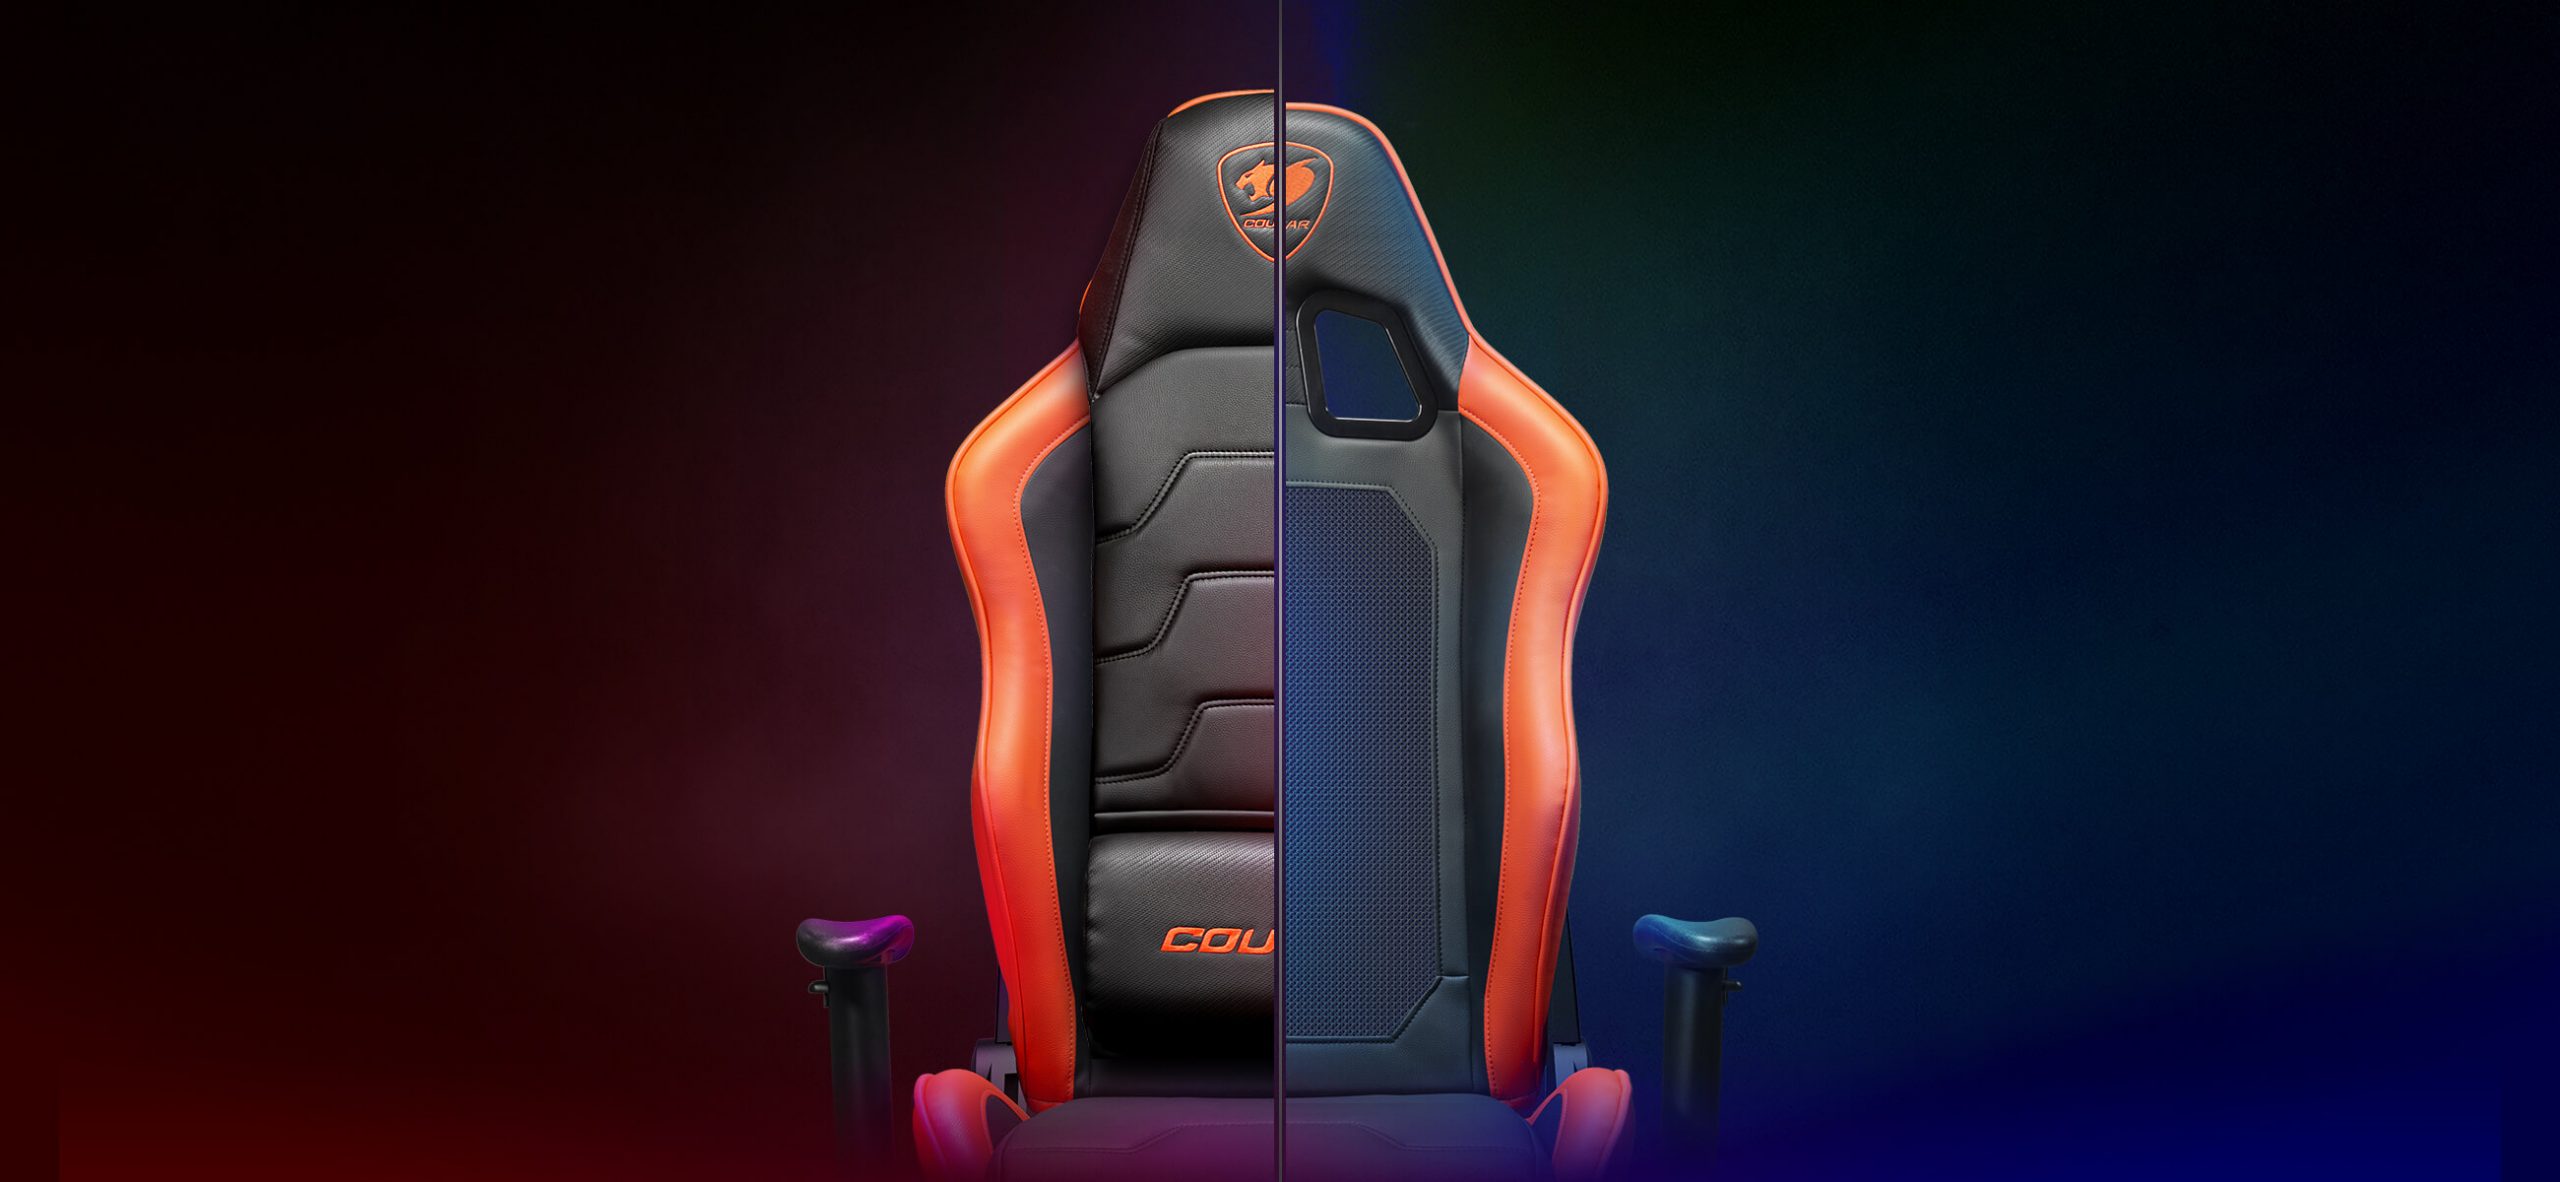 Gaming chair Cougar Armor black computer, up to 120 kg, PU leather, 4D,  180° folding